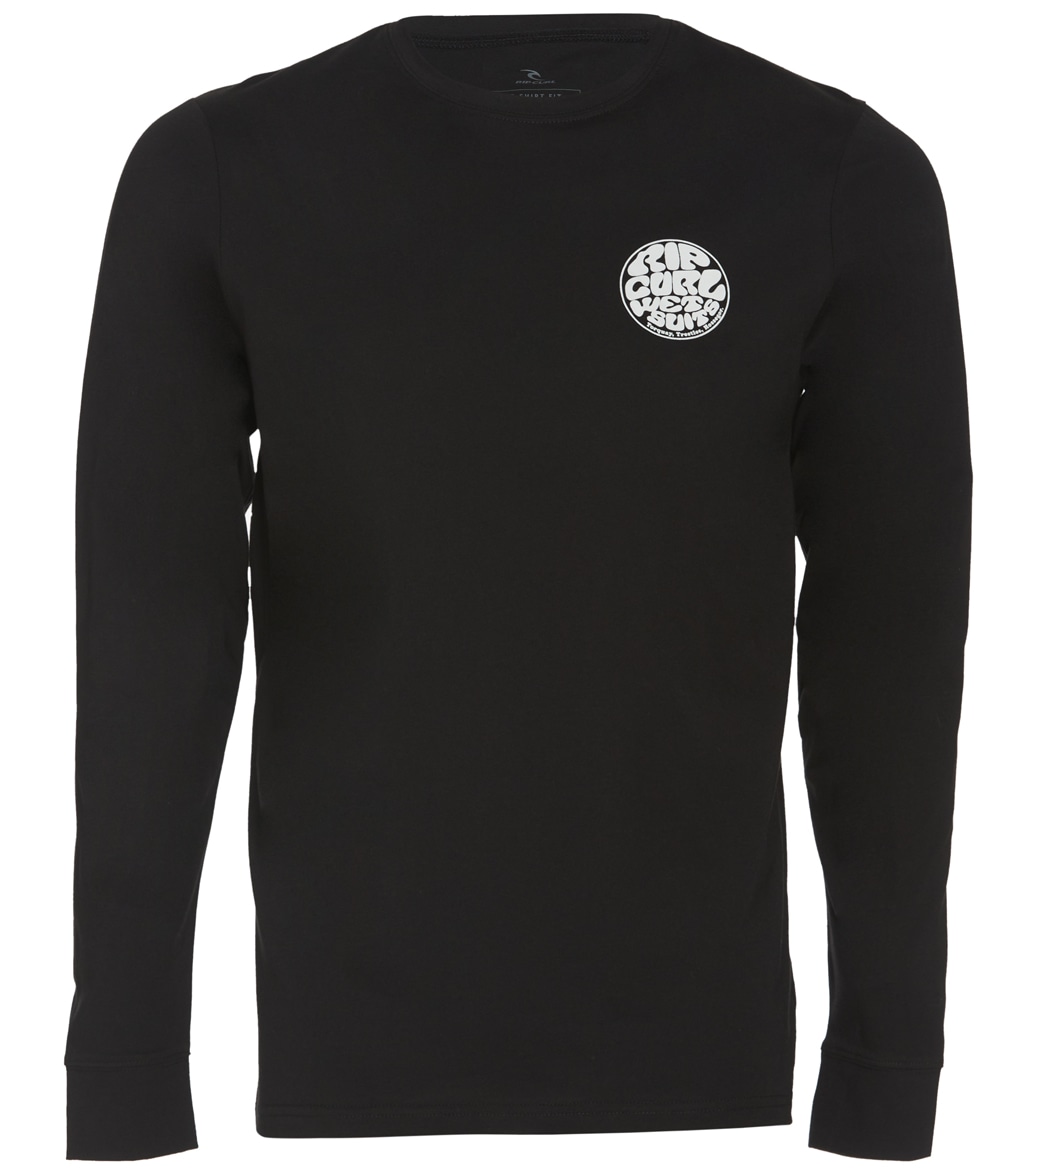 Rip Curl Men's Icons Of Surf Long Sleeve Upf 50 Shirt - Black Large Cotton/Polyester - Swimoutlet.com